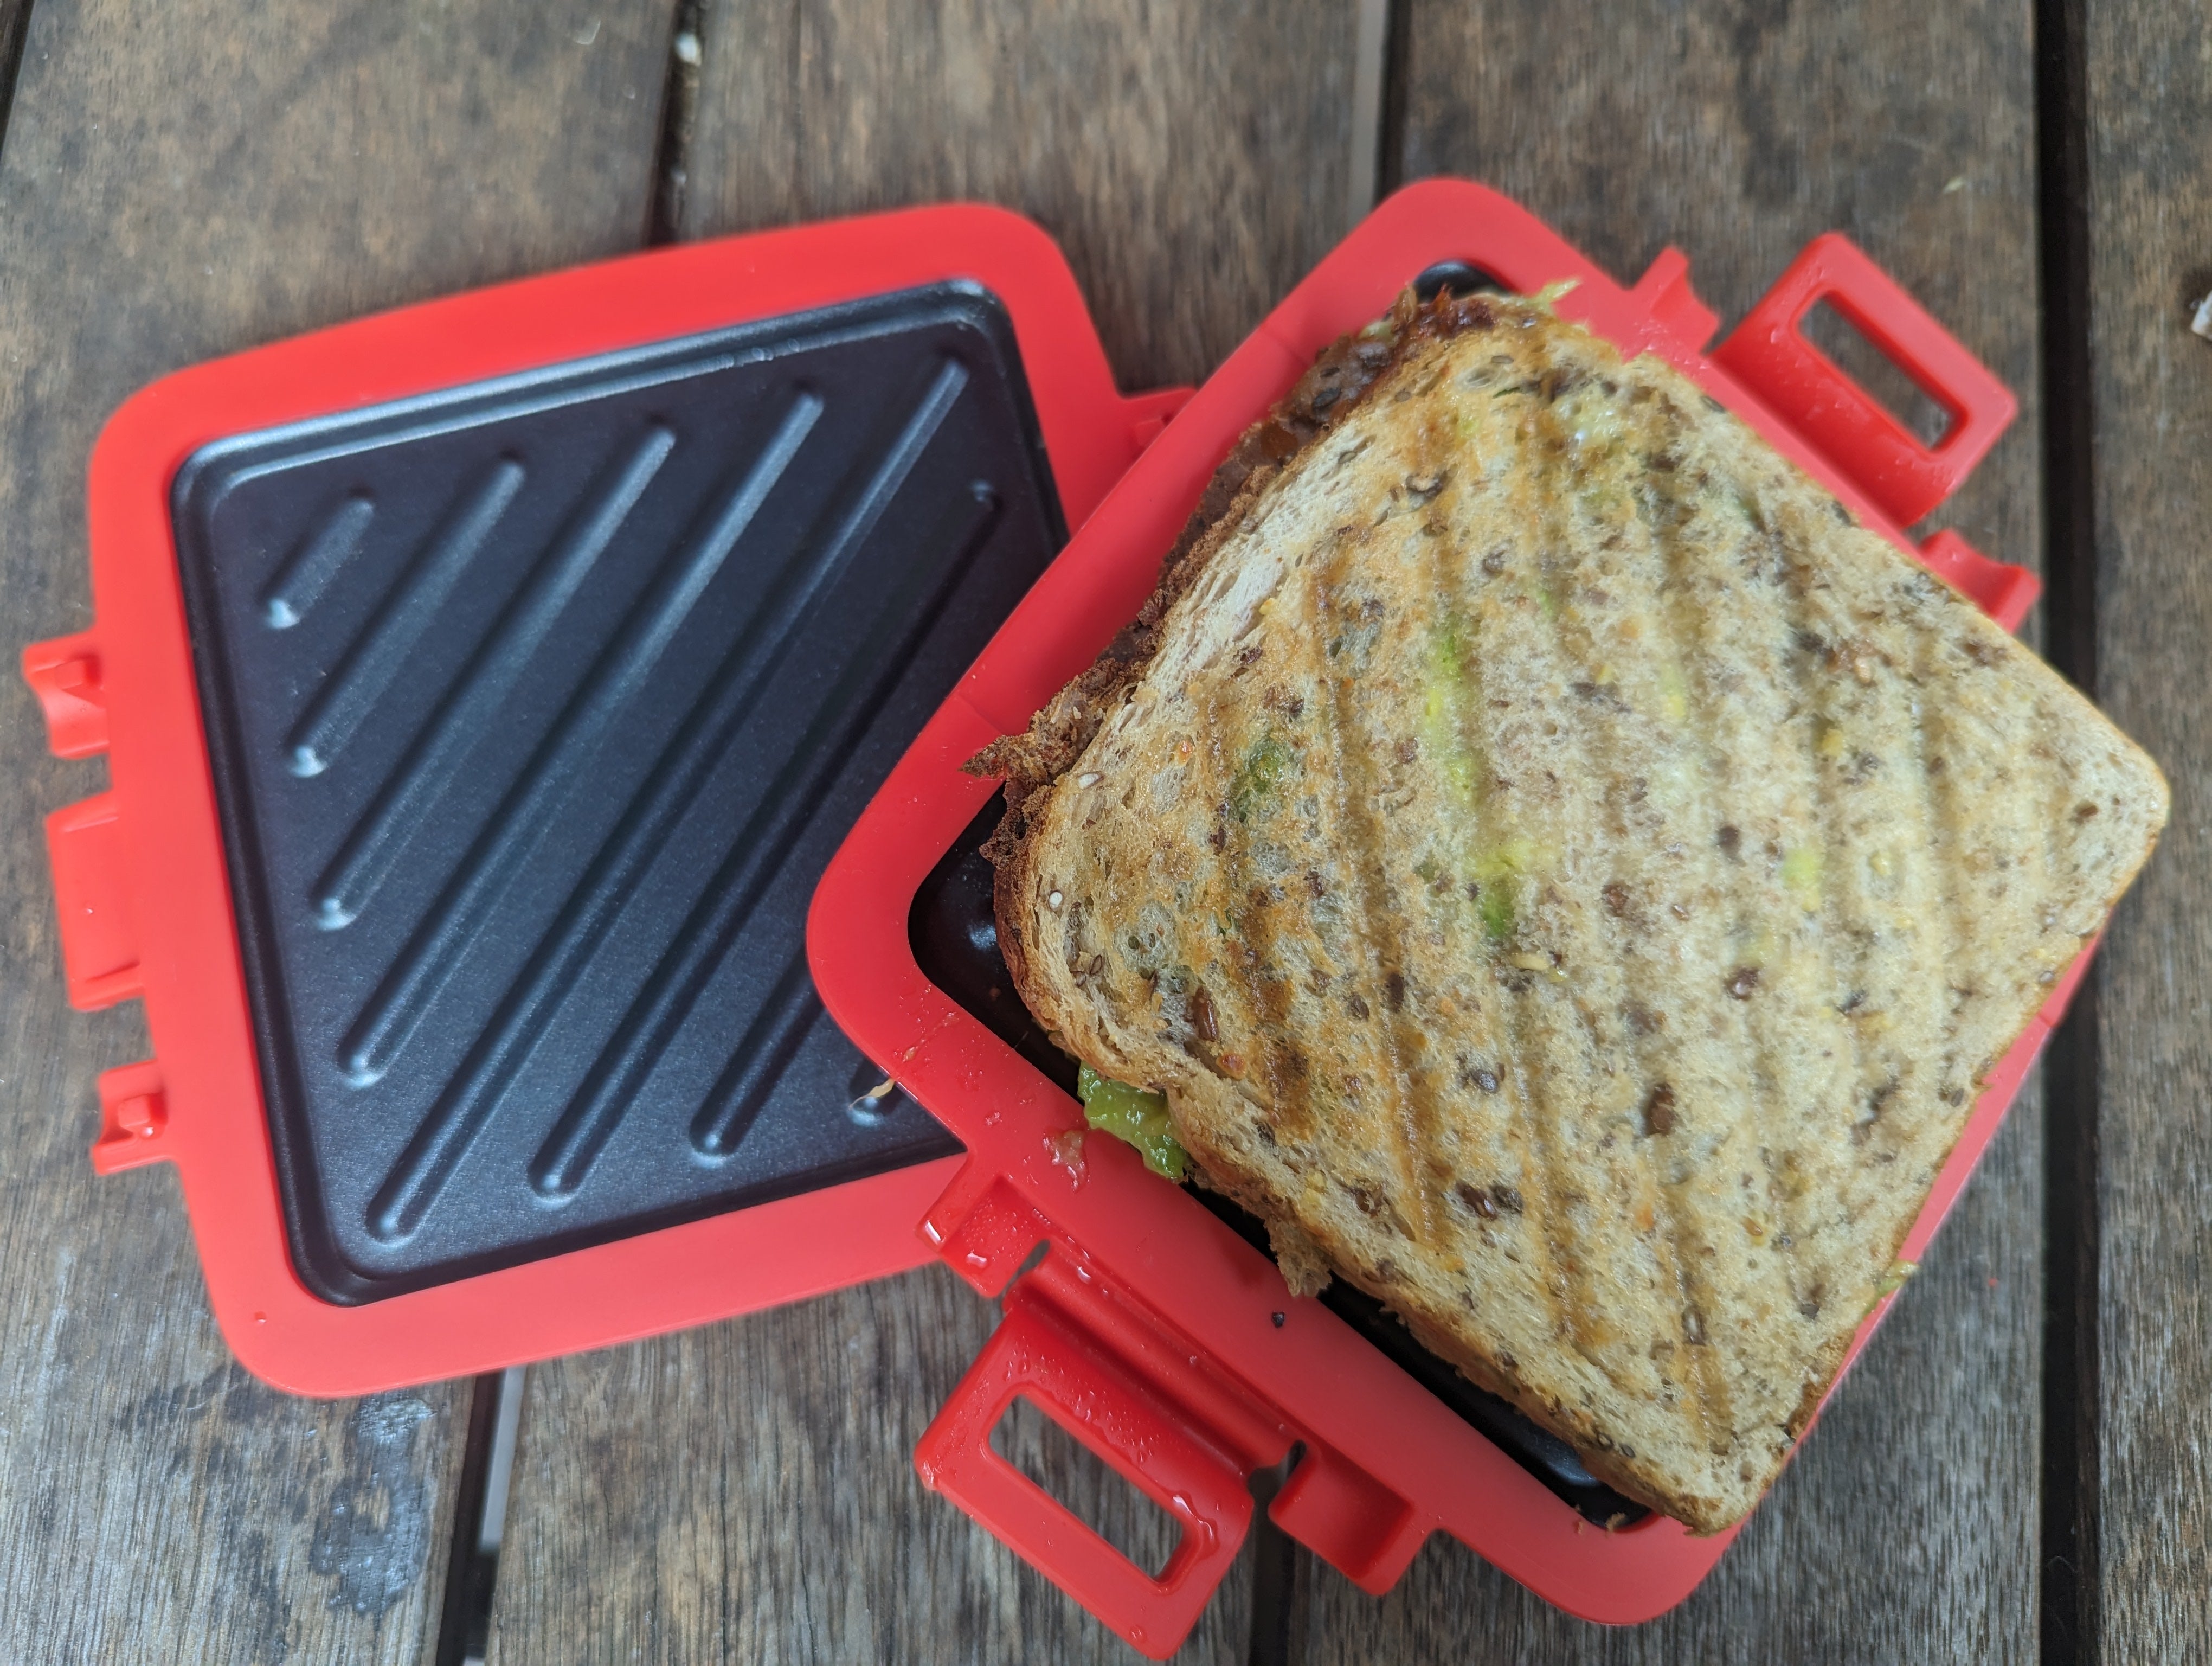 Road Chef Microwave Toasted Sandwich Maker